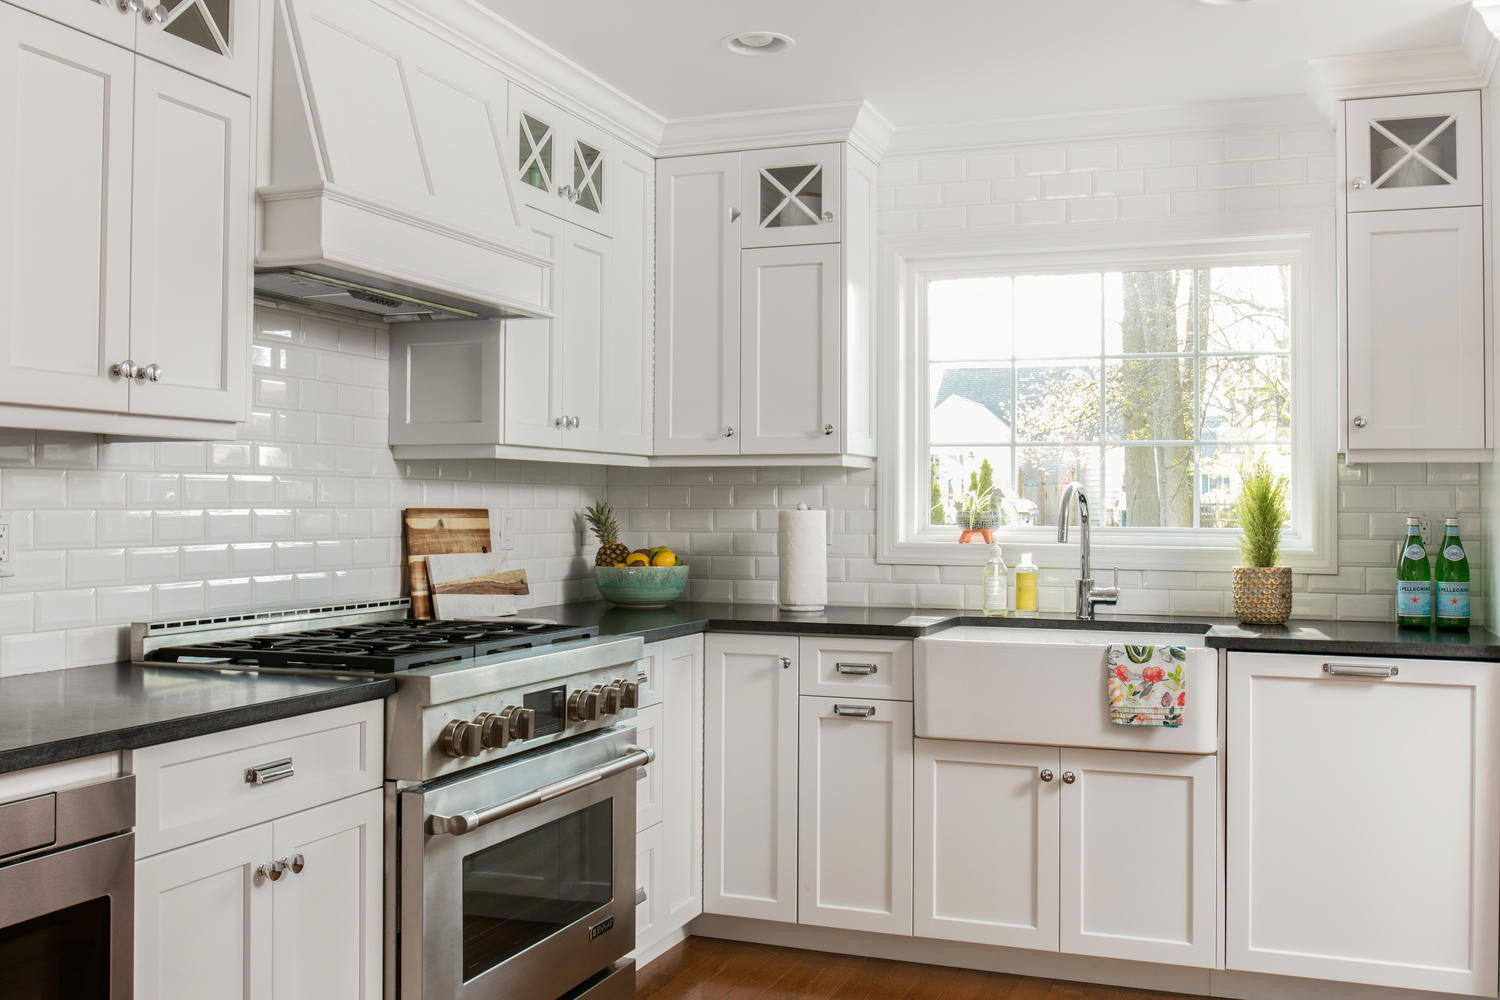 Images Of White Kitchen Cabinets
 A look at Classic White Kitchen Shrewsbury New Jersey by